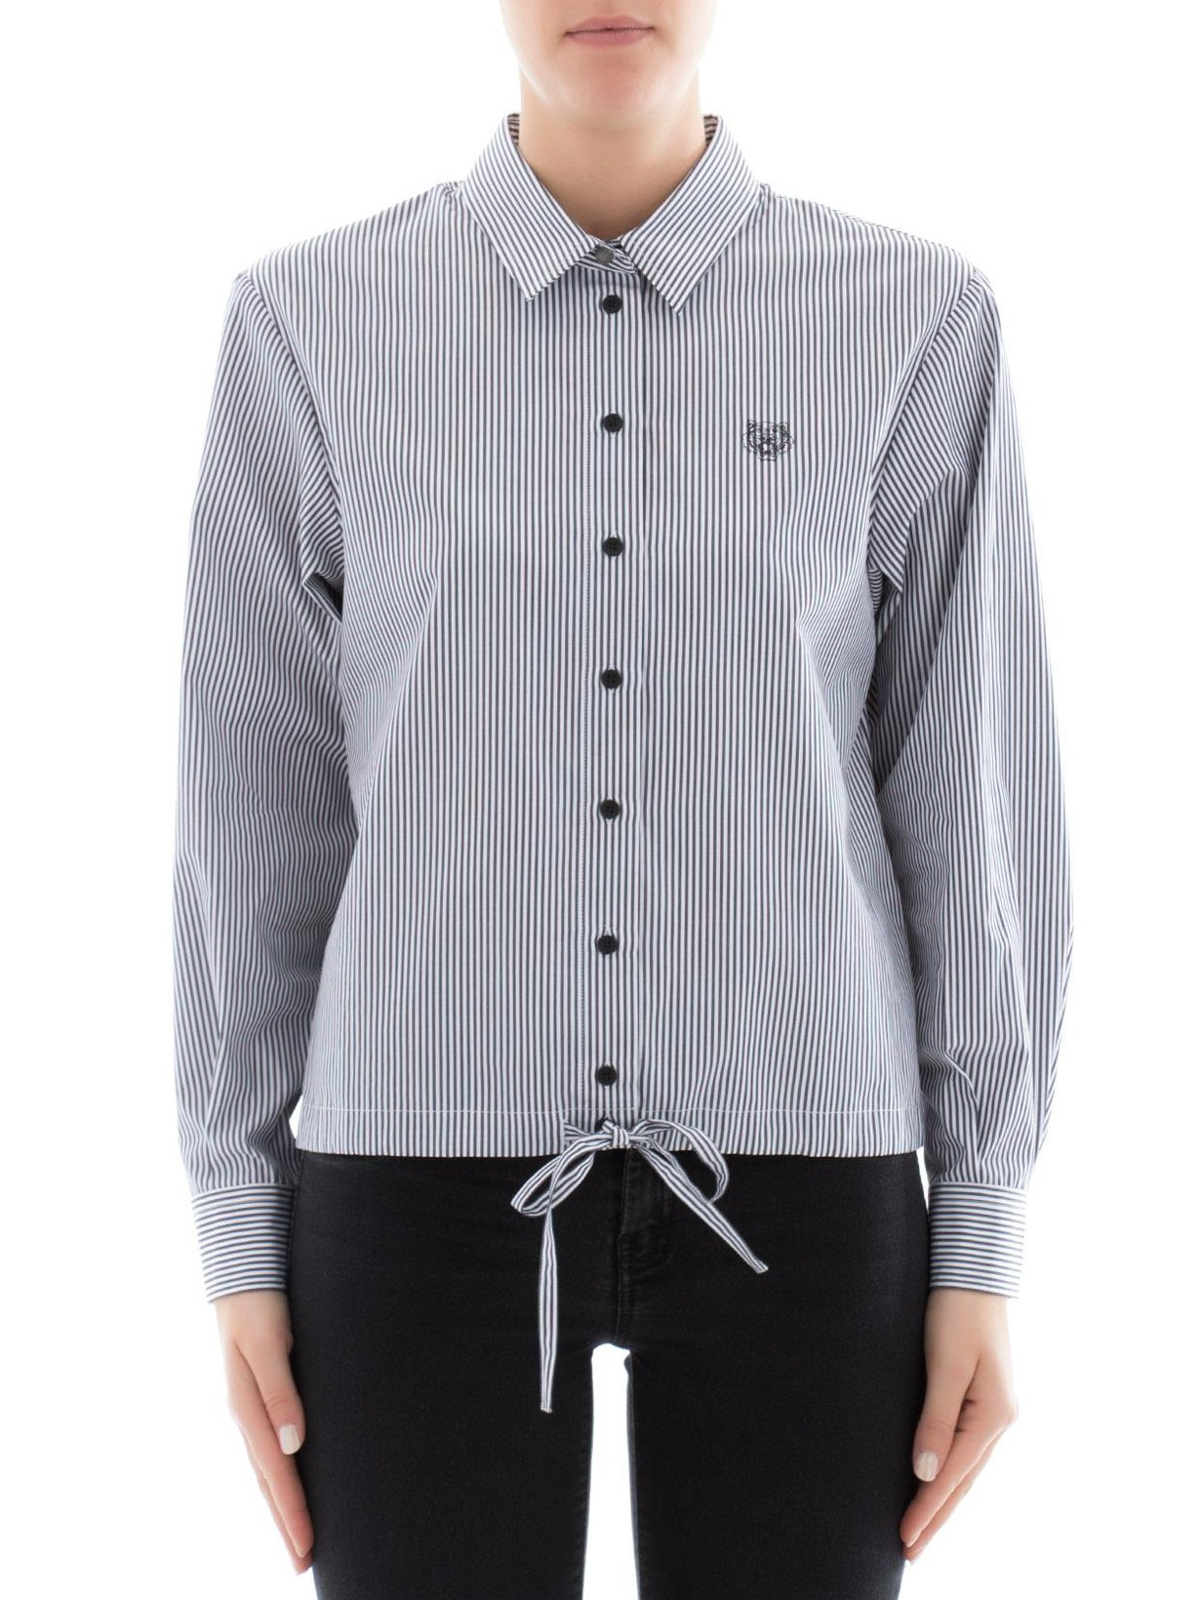 kenzo button up